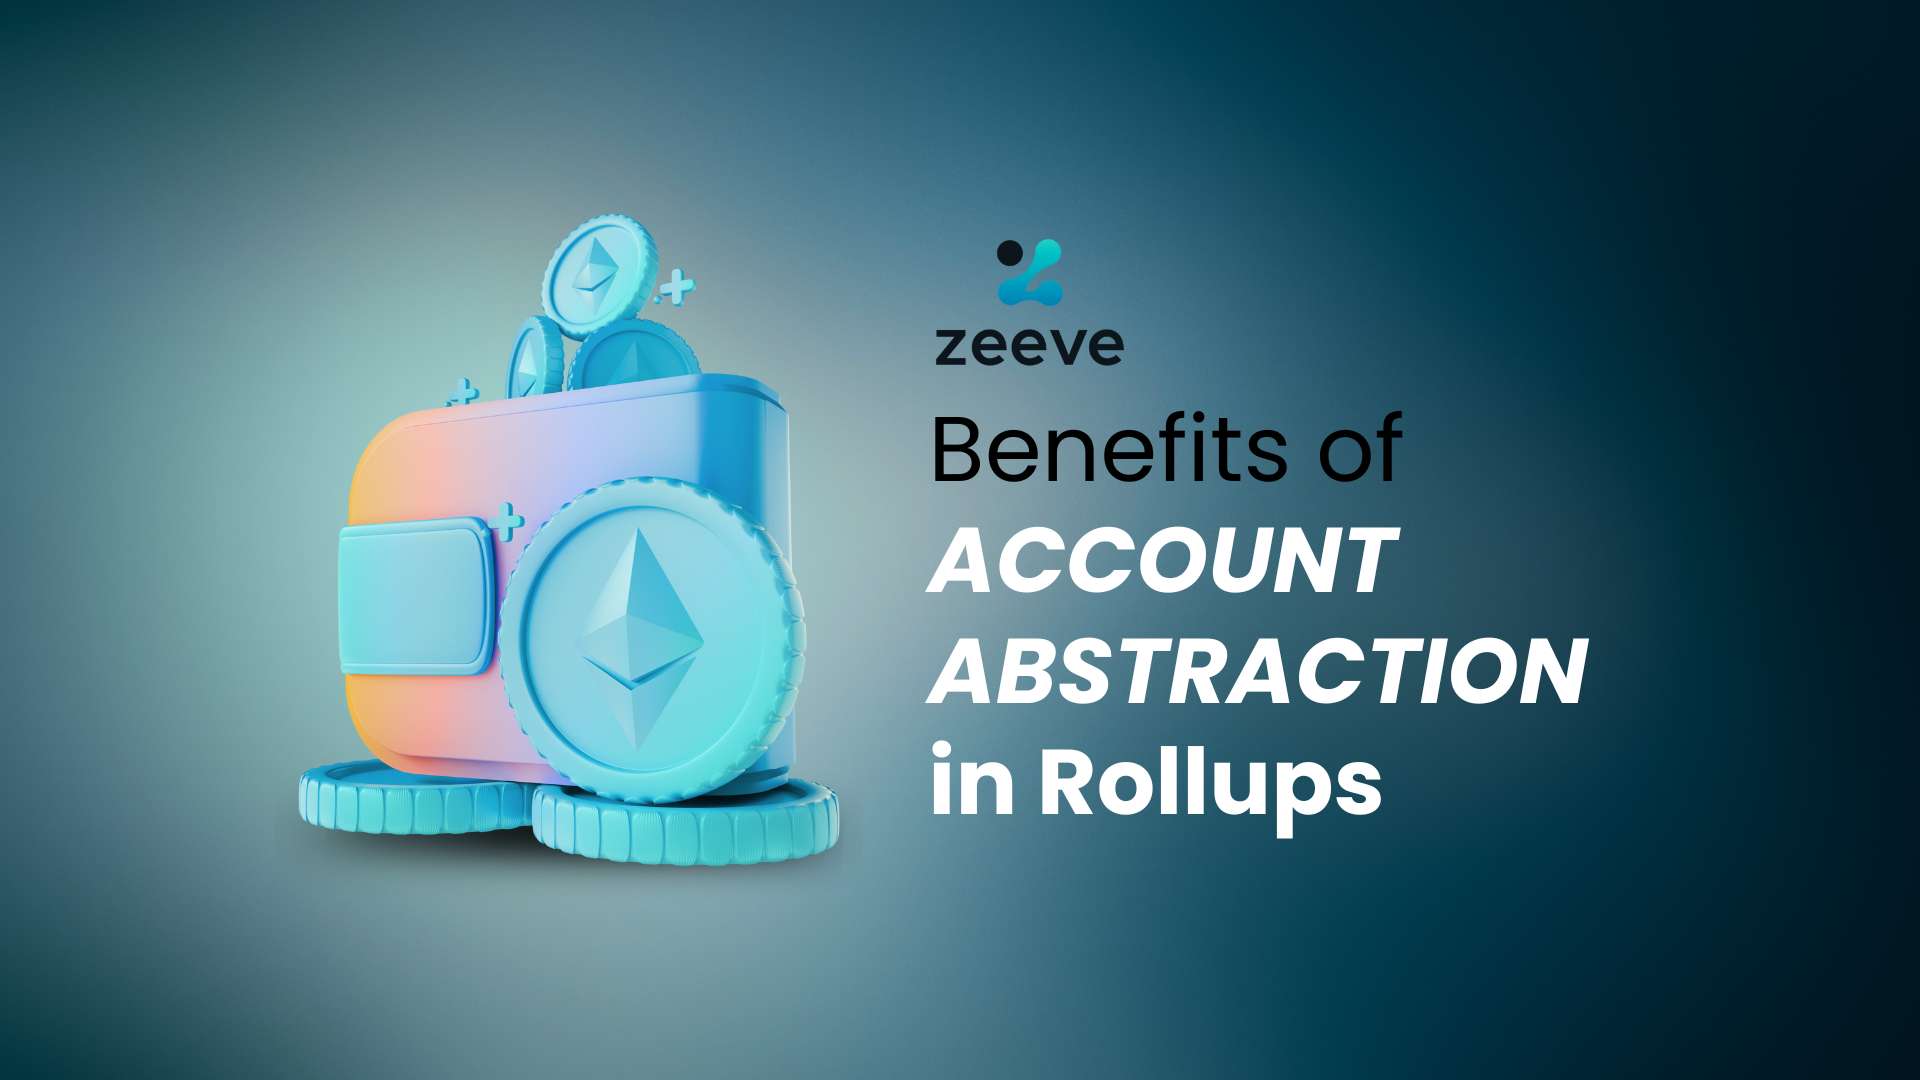 Account Abstraction in Rollups